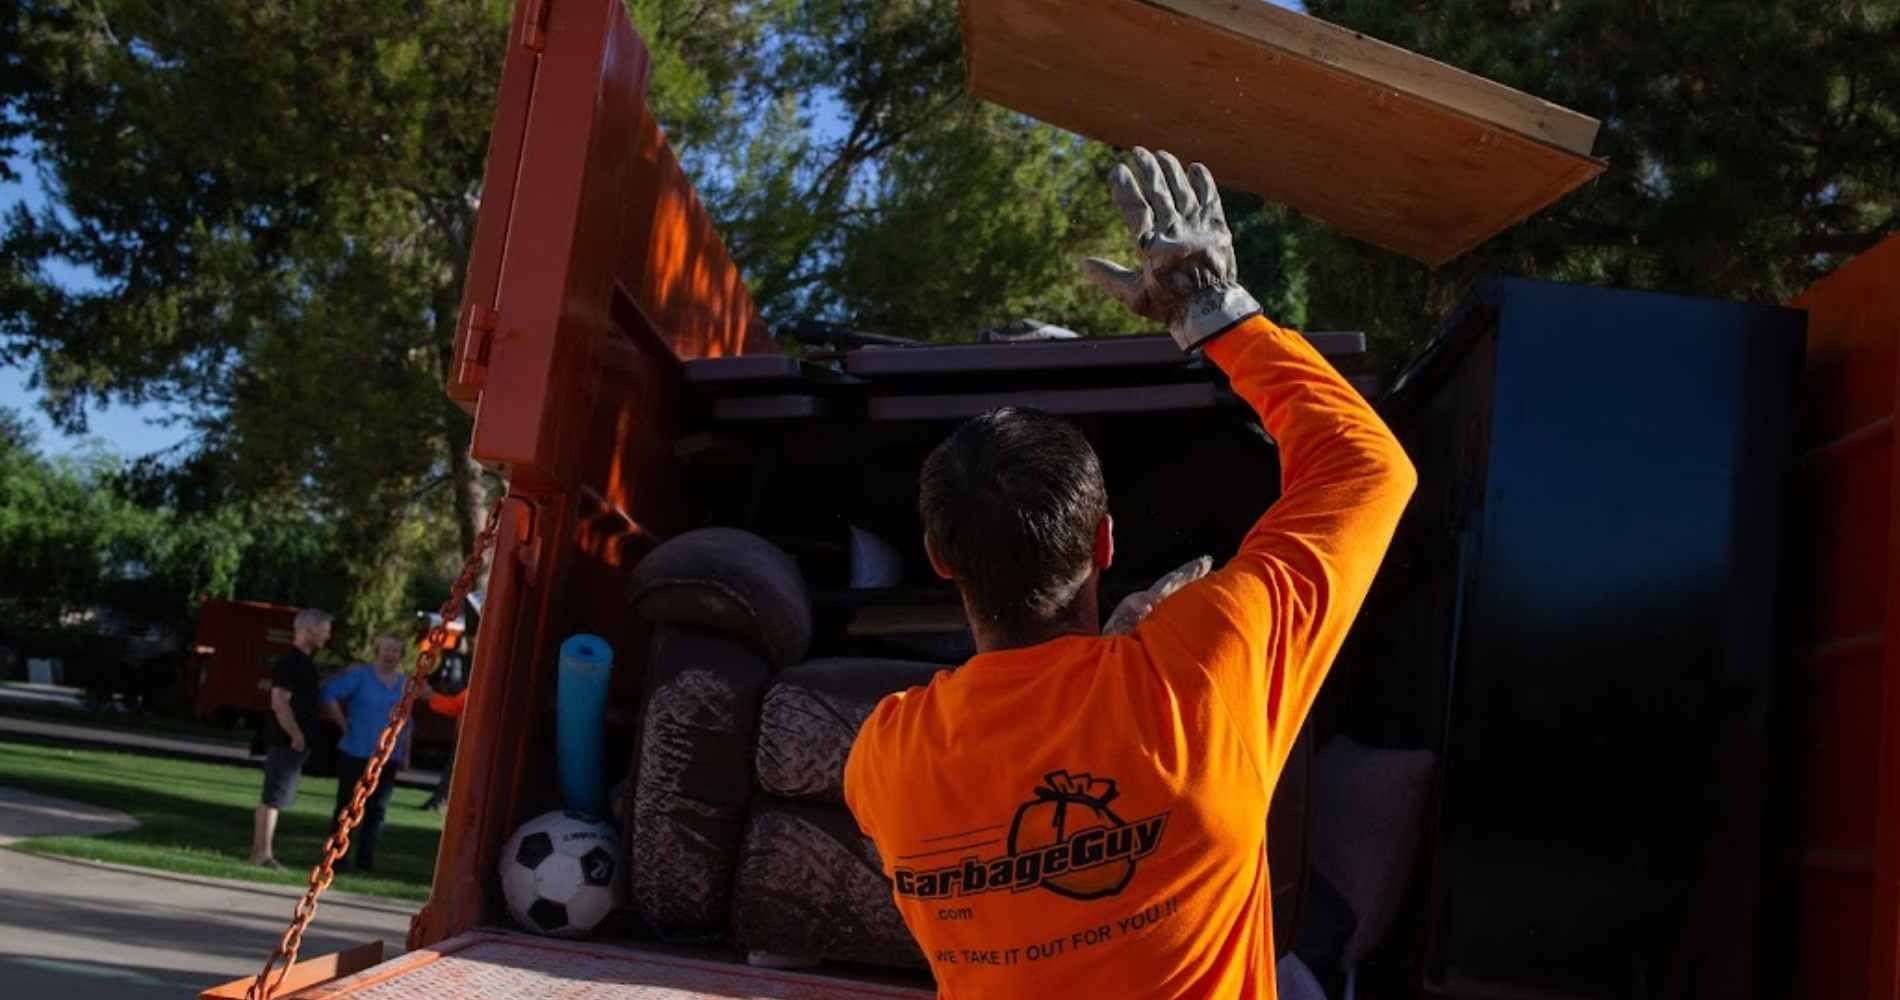 #1 for Eviction Cleanout in Scottsdale, AZ with Over 1200 5-Star Reviews!